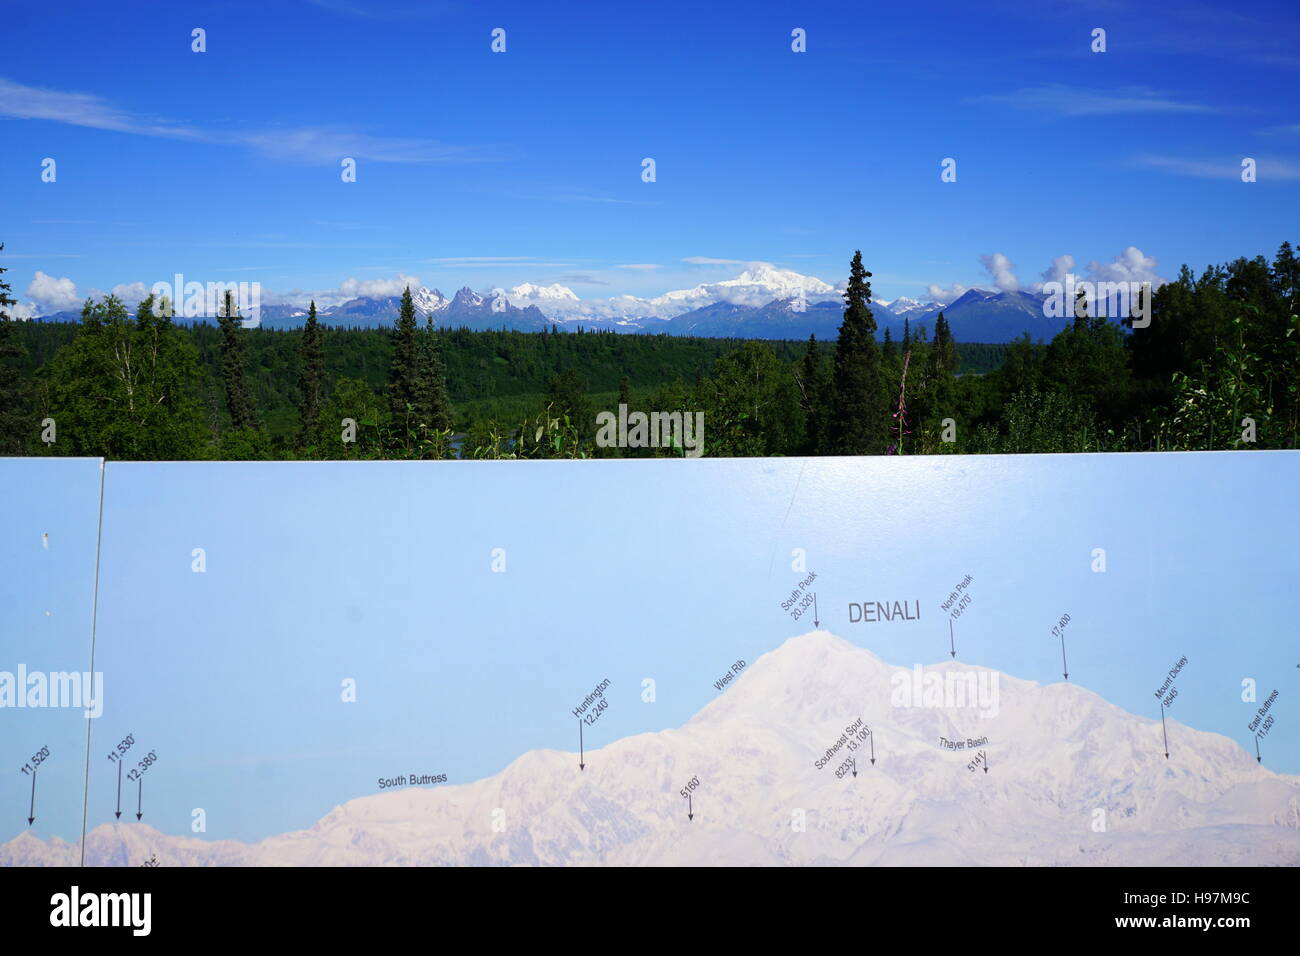 A photo of an illustration (bottom portion) of the Denali (Mount McKinley) compare to the real thing, Denali State Park, Alaska Stock Photo